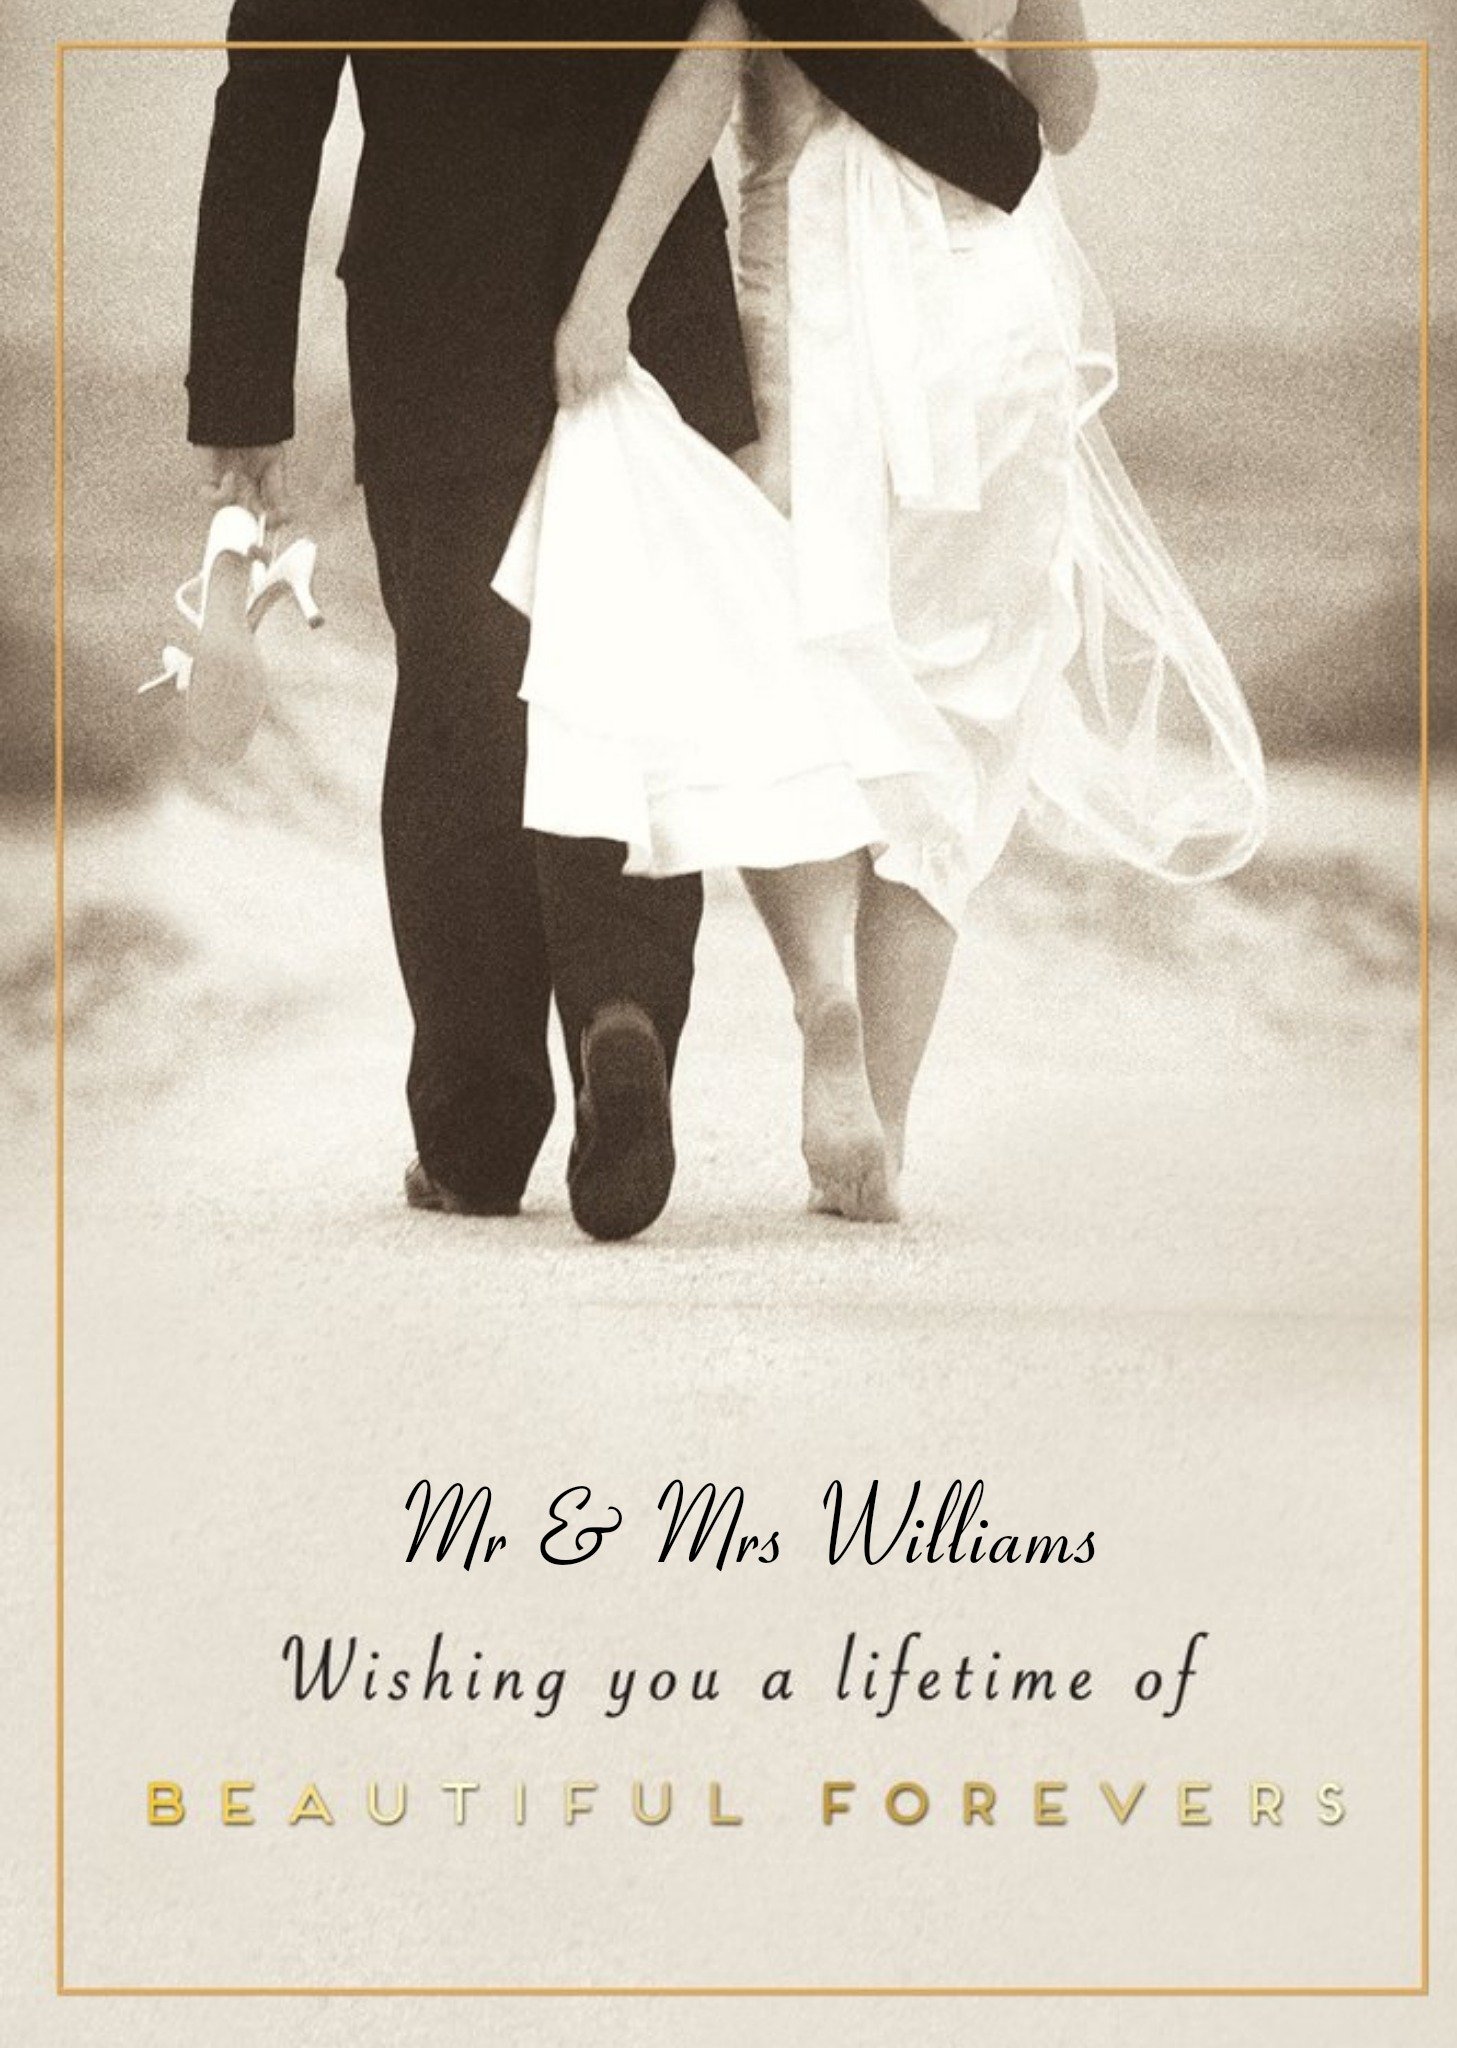 Moonpig Pigment Lifetime Of Beautiful Forevers Photographic Wedding Card, Large